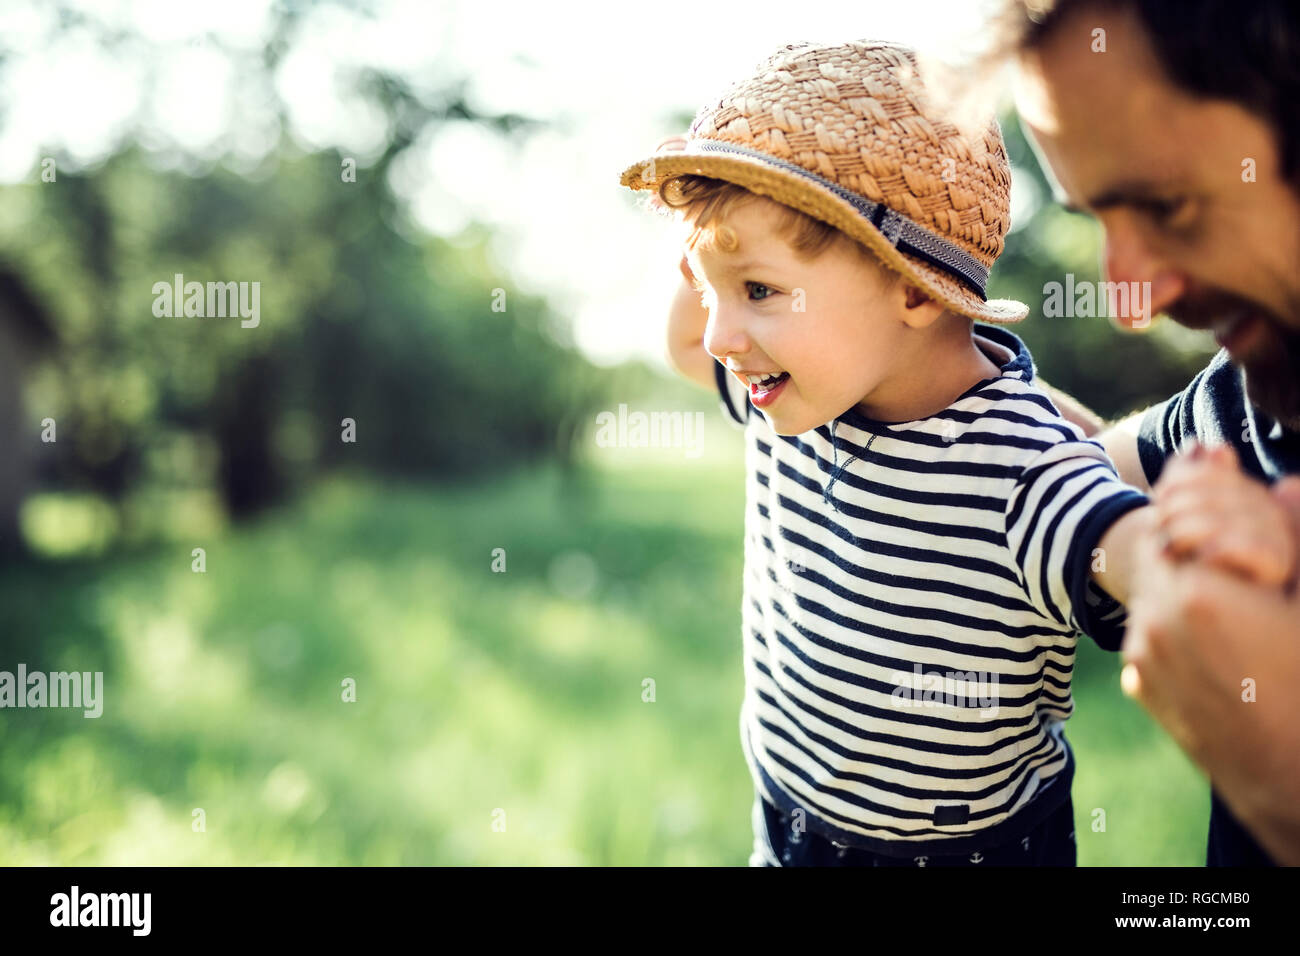 Father assisting little boy in balancing outdoors Stock Photo